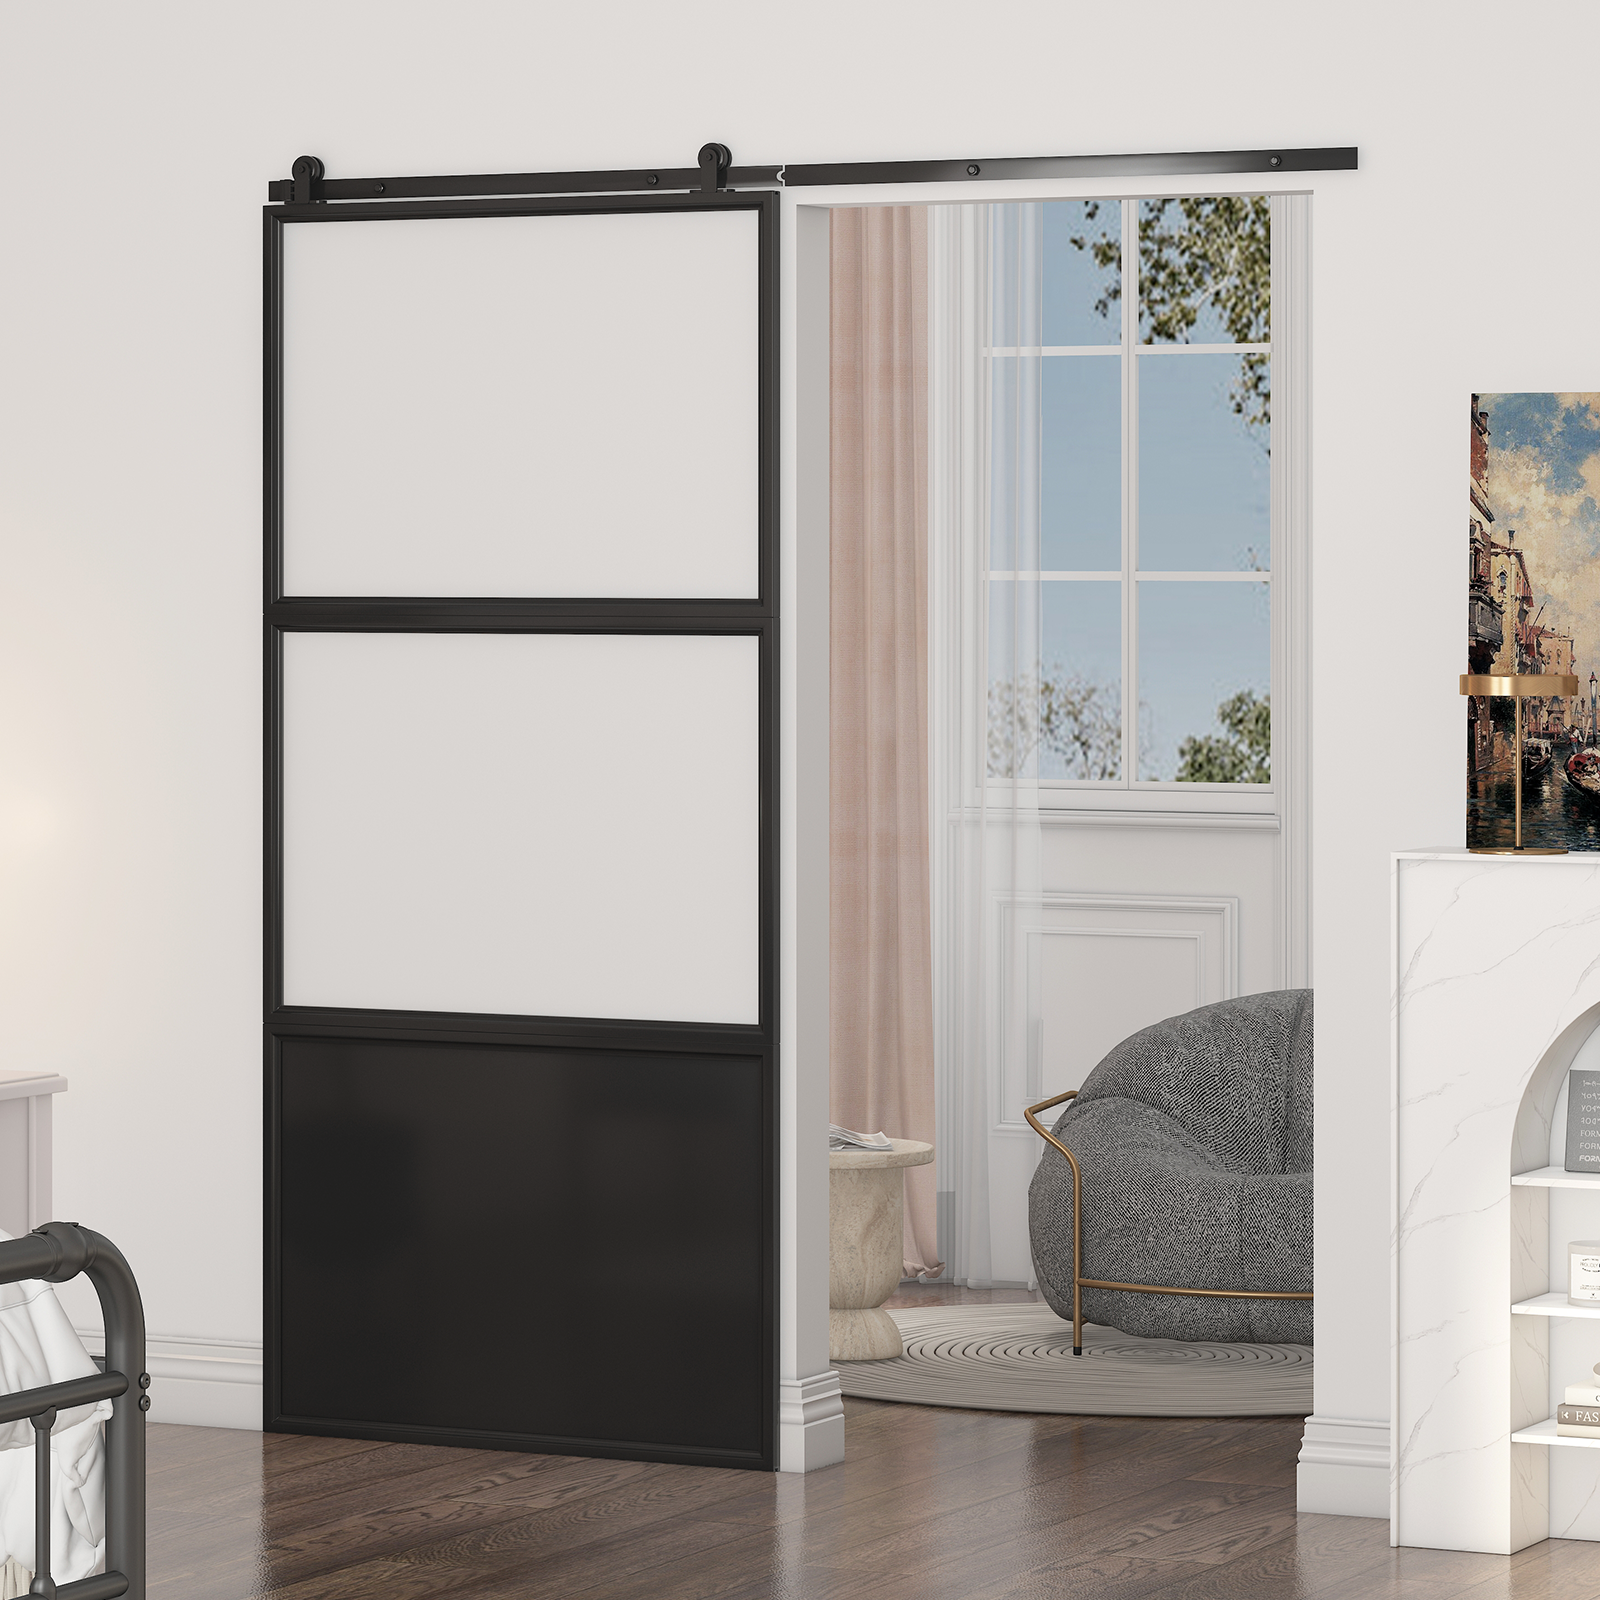 Cecer Minimalist Style Metal Barn Door, Track Sliding Door with Hardware Components, Silent Barn Door with Frosted Tempered Glass, Easy to Install